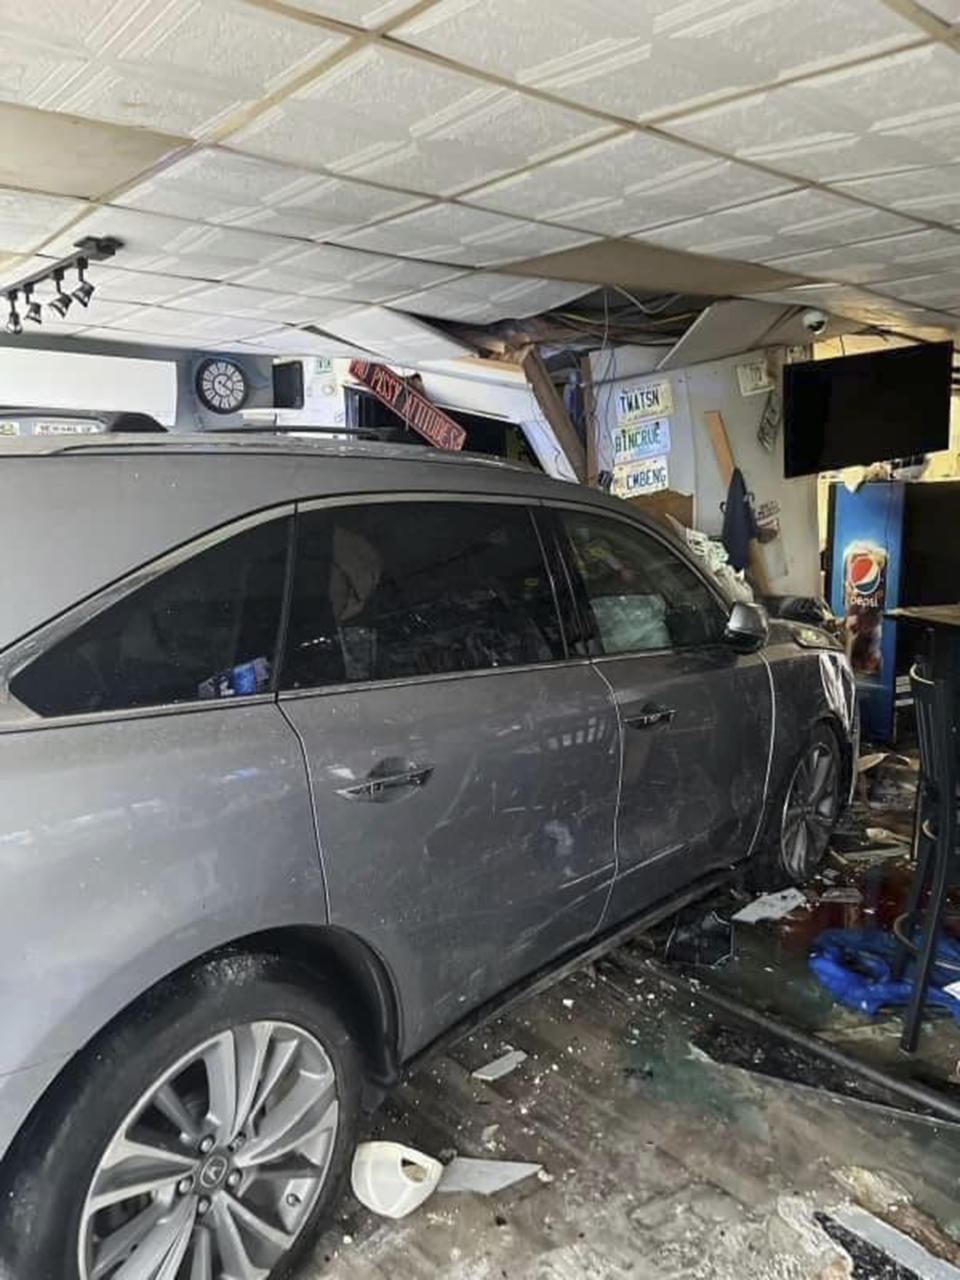 In this photo released by the Laconia Fire Department, a vehicle sits inside a restaurant after crashing through the wall on Sunday, July 2, 2023, in Laconia, NH. The car struck the busy Looney Bin Bar & Grill and injured more than a dozen patrons inside, authorities said. (Laconia Fire Department via AP)